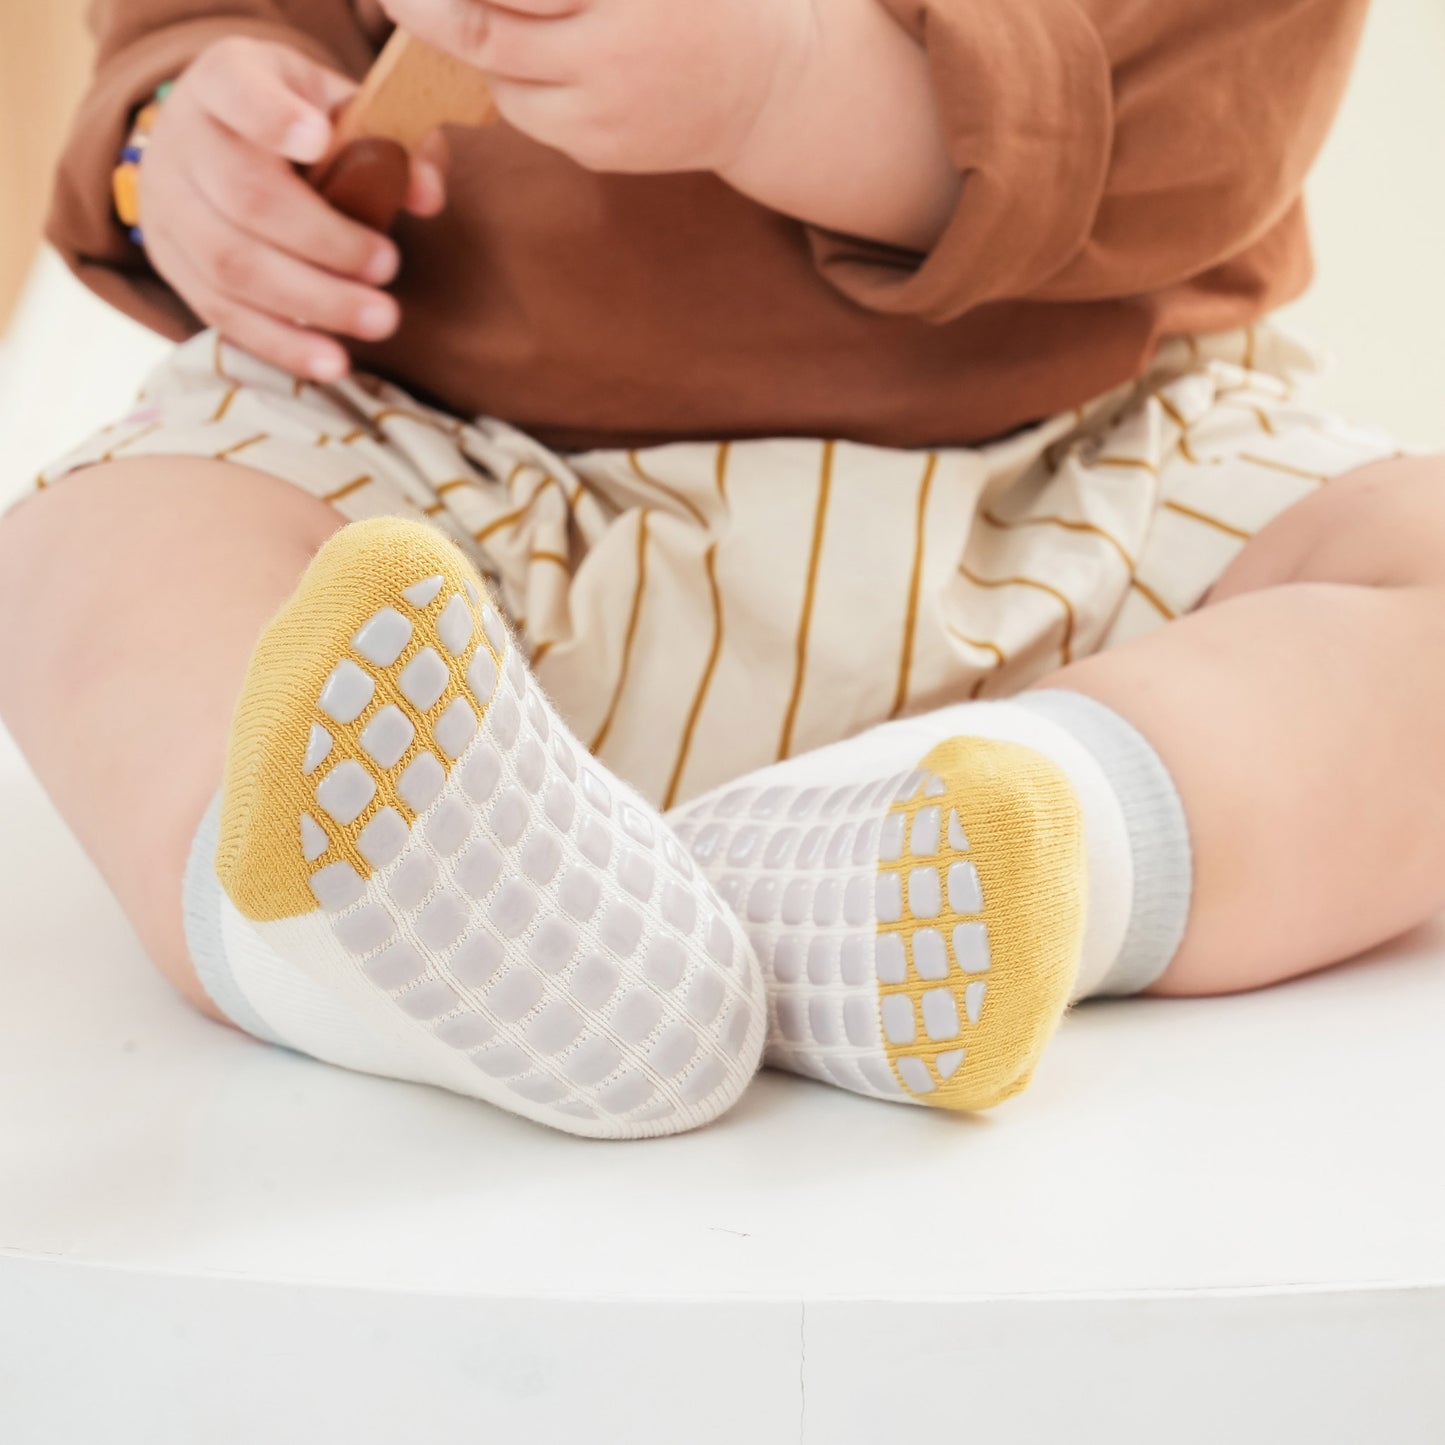 New- Well Done - 4 Pairs of Stay-On Baby & Toddler Non-Slip Socks